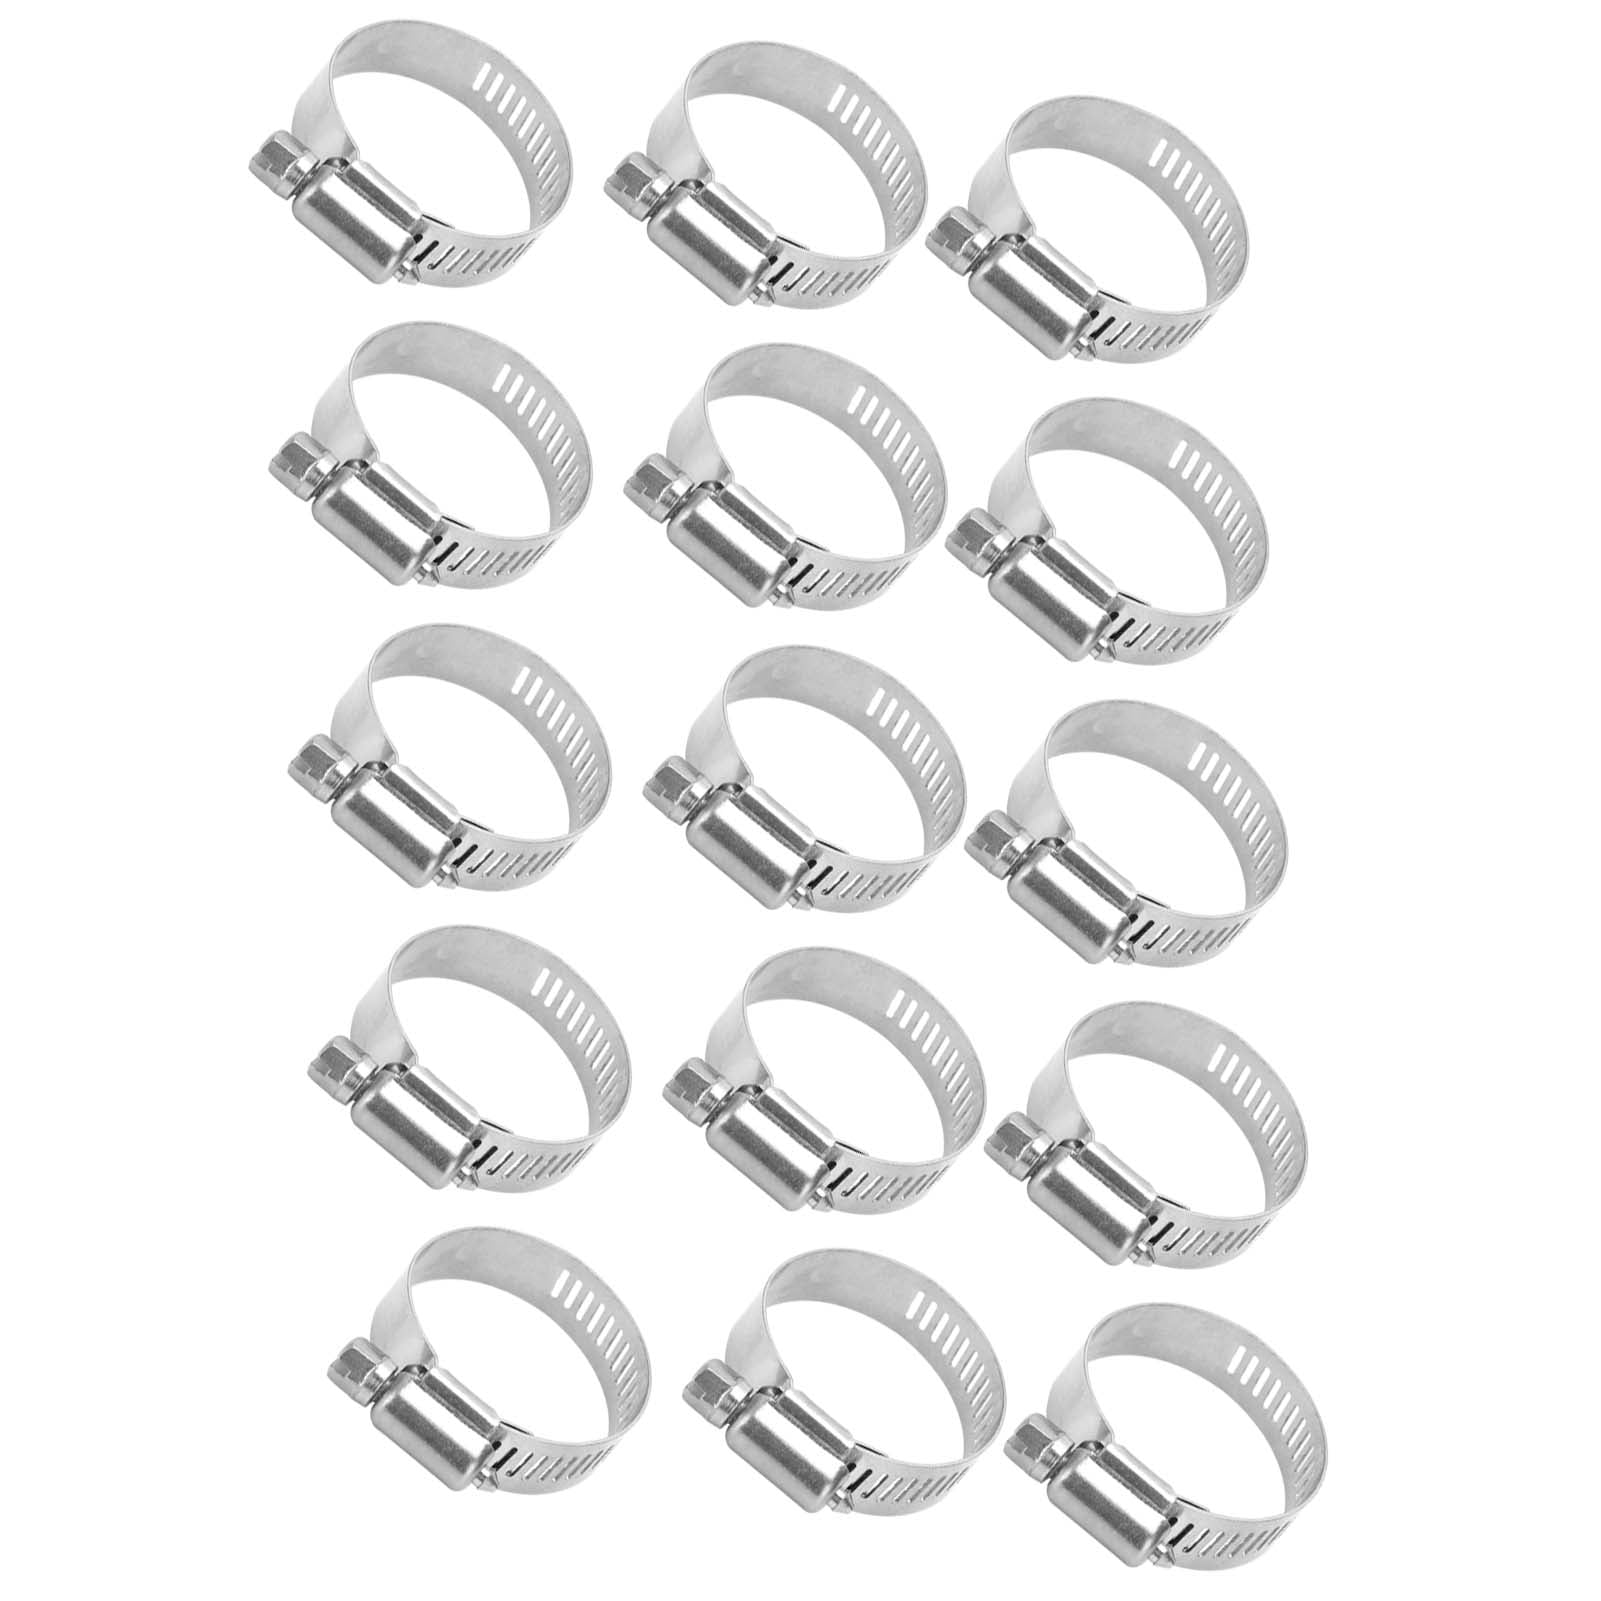 20Pcs Stainless Steel Hose Pipe Clamp Clamps Hose Clips Set Exhaust Assorted GK 